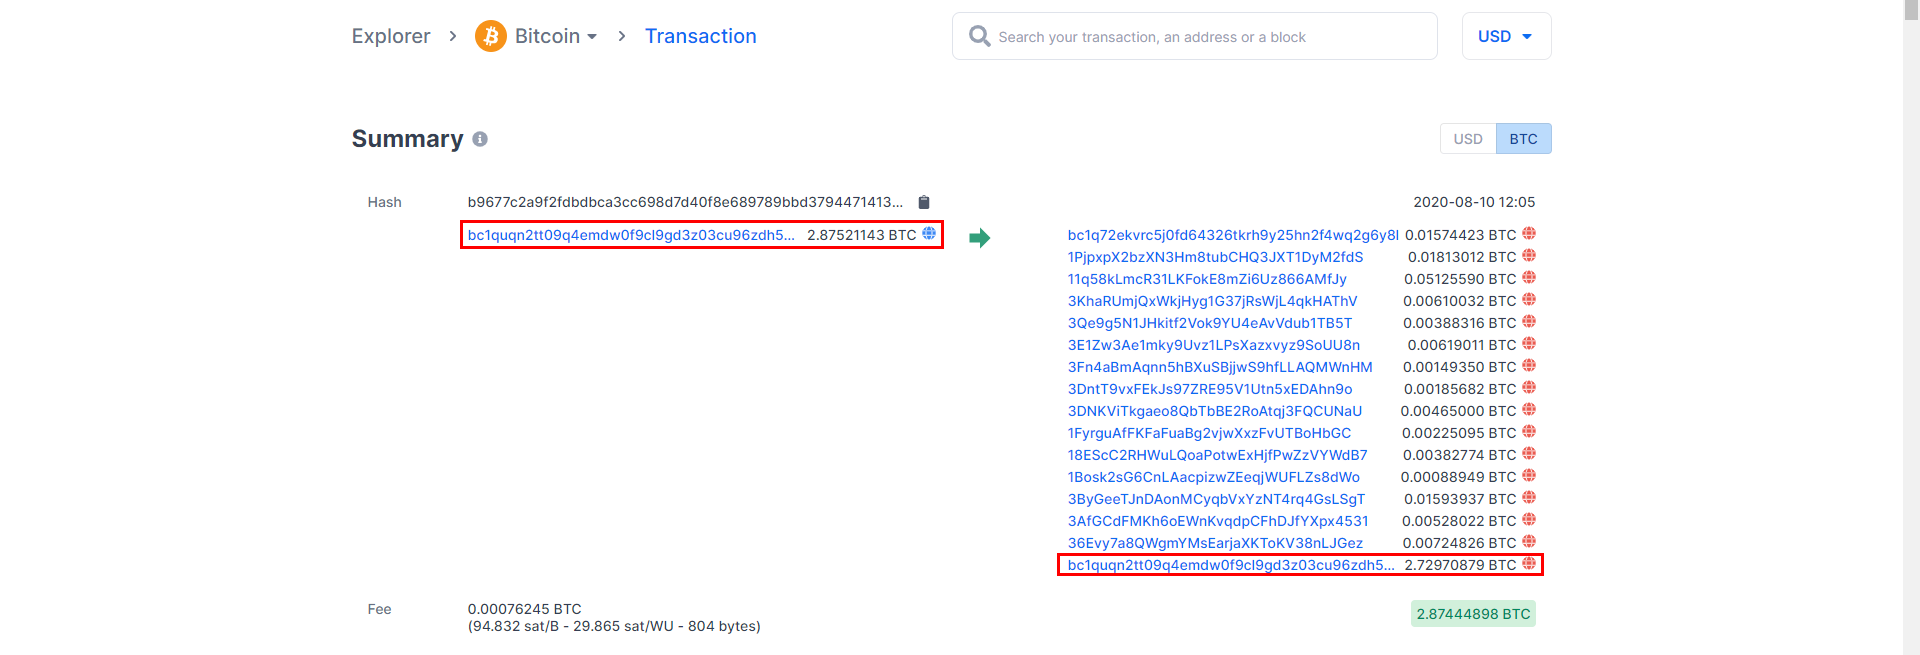 Source: Blockchain.com. Example of a classic Mixer withdrawal transaction.